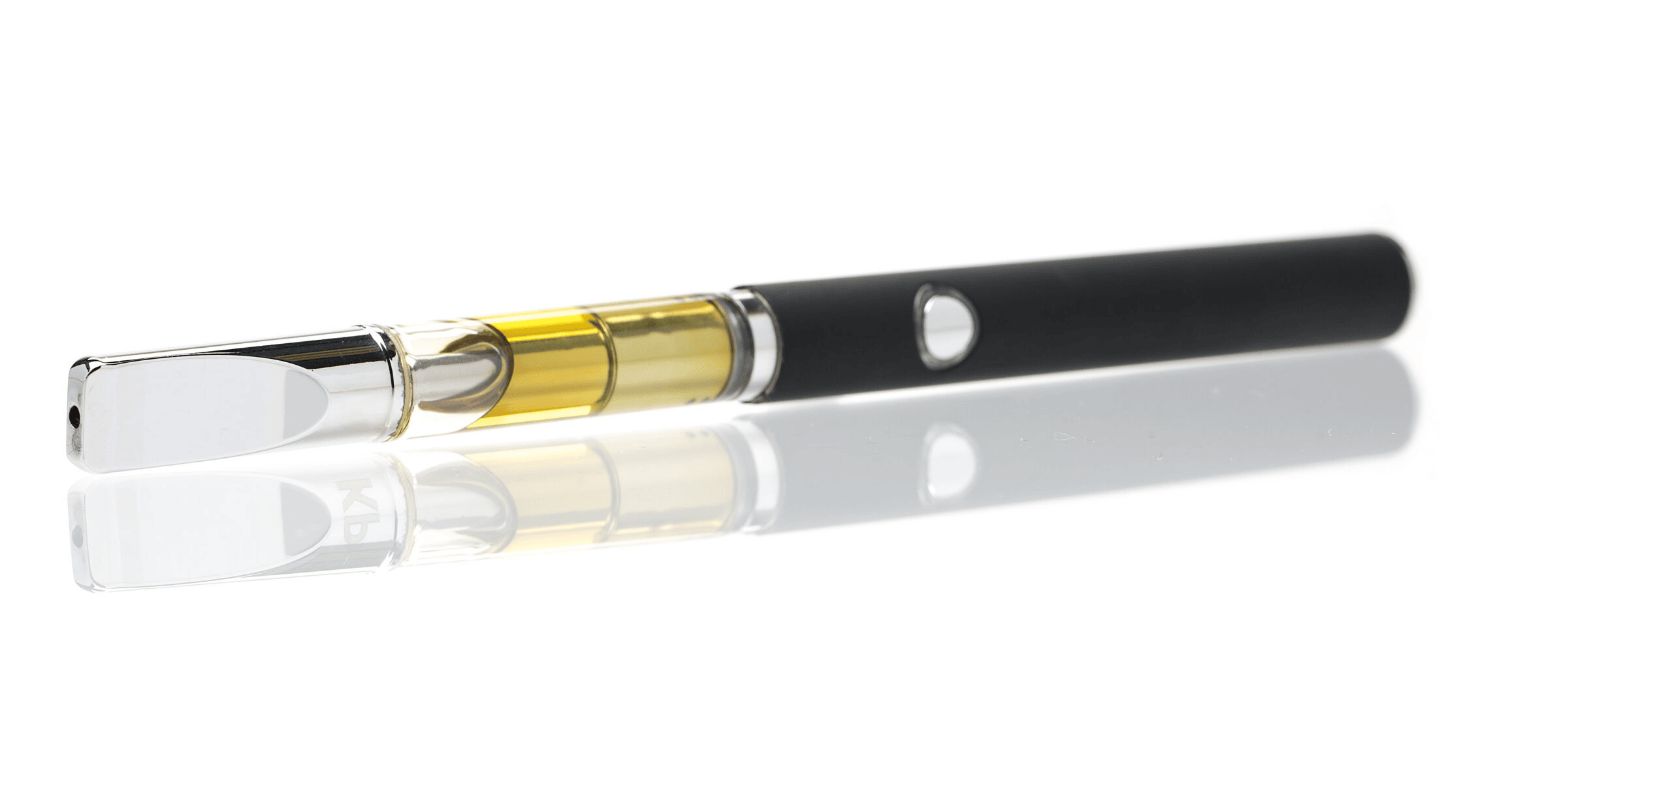 You are excited to buy weed online in Canada and begin vaping. But to do that, you'll want to invest in a high-quality 510 vape pen.